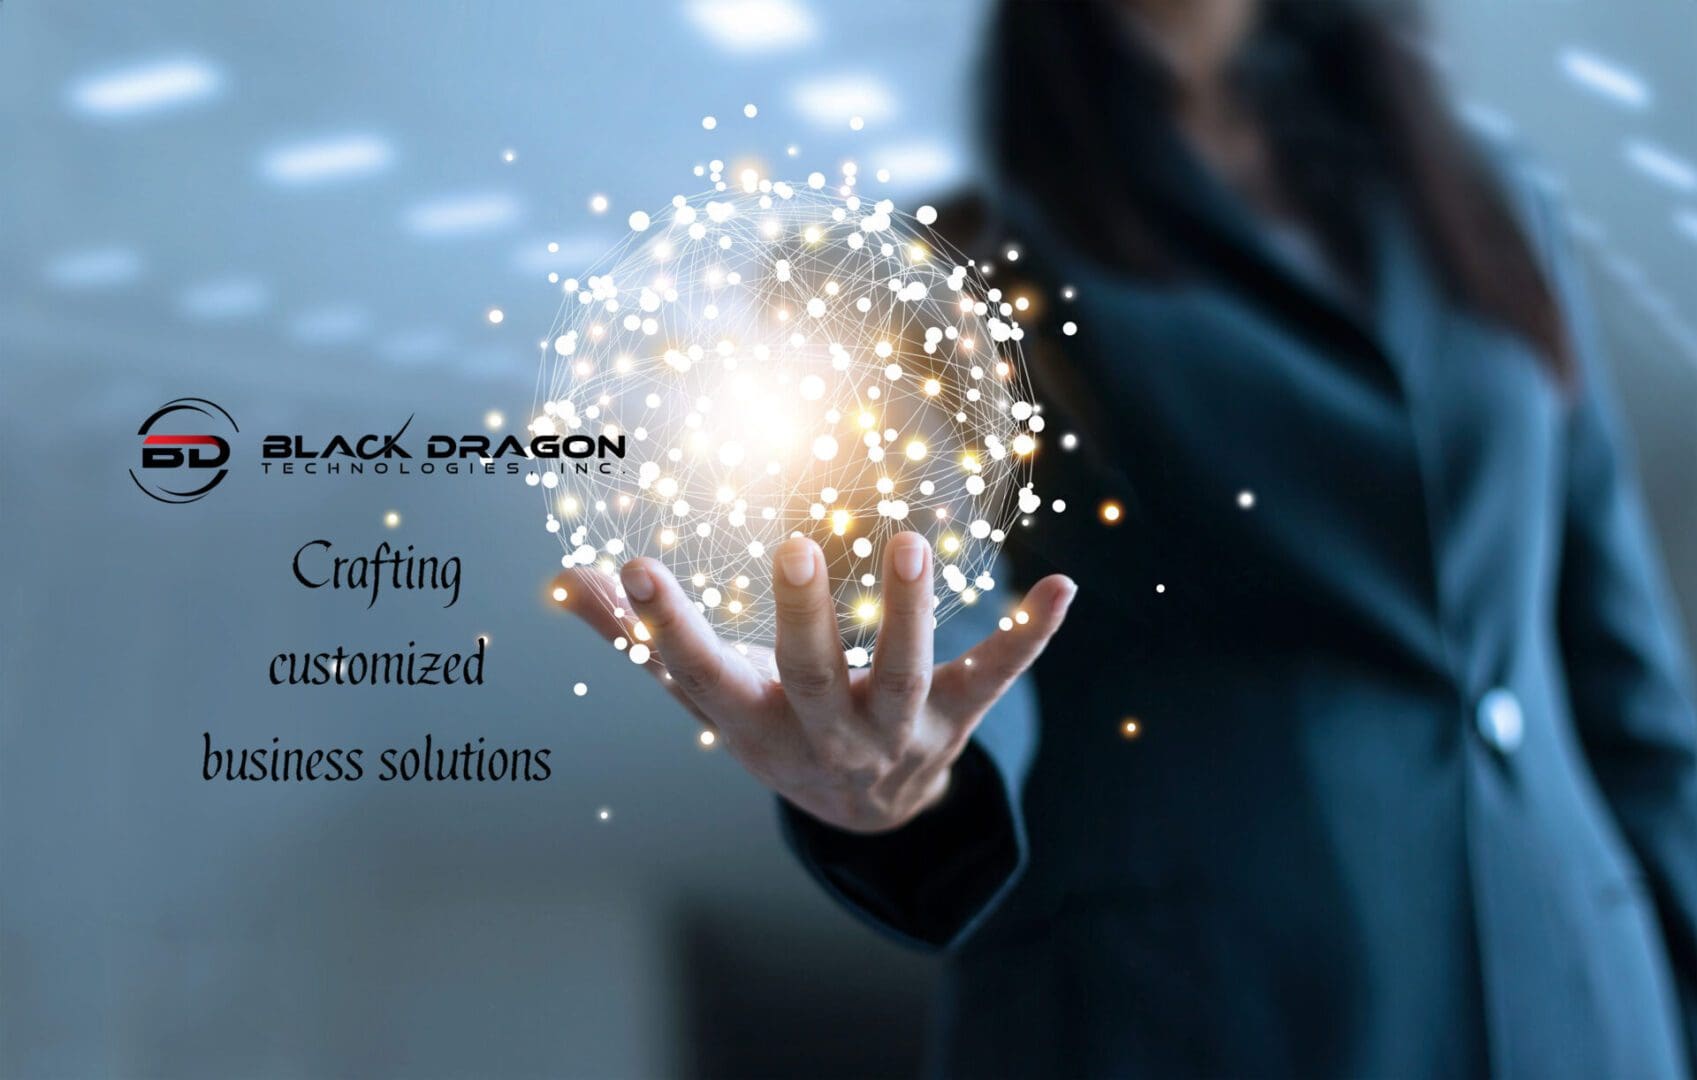 Black Dragon crafting customized business solutions